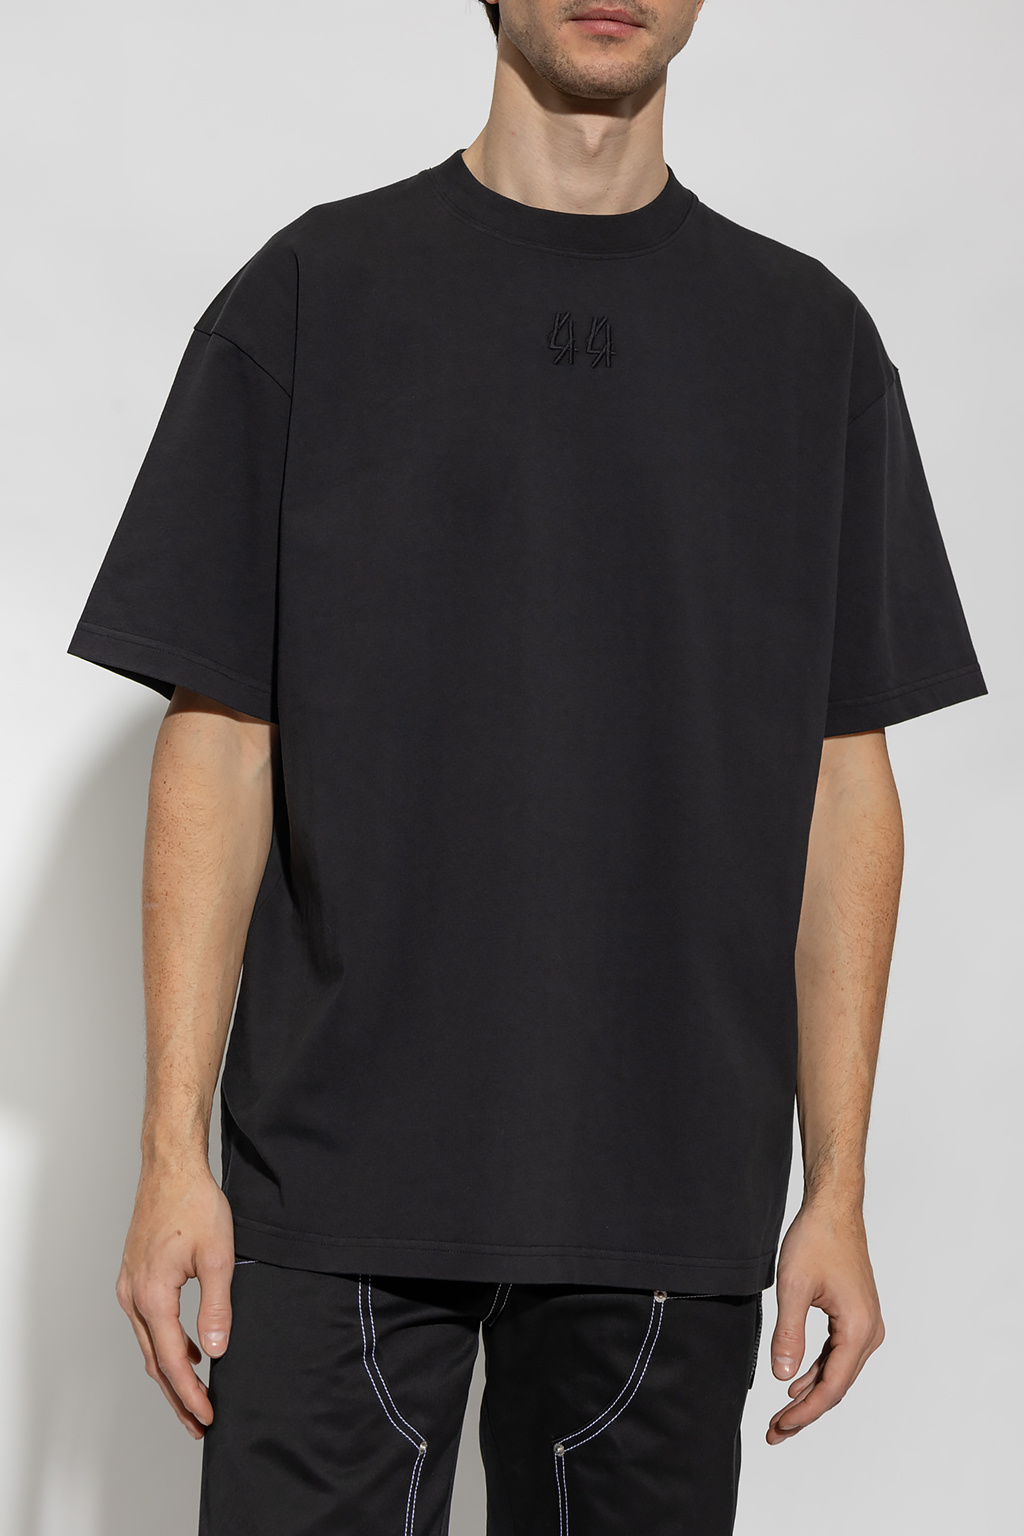 44 Label Group Bershka washed t-shirt with raw edge in stone